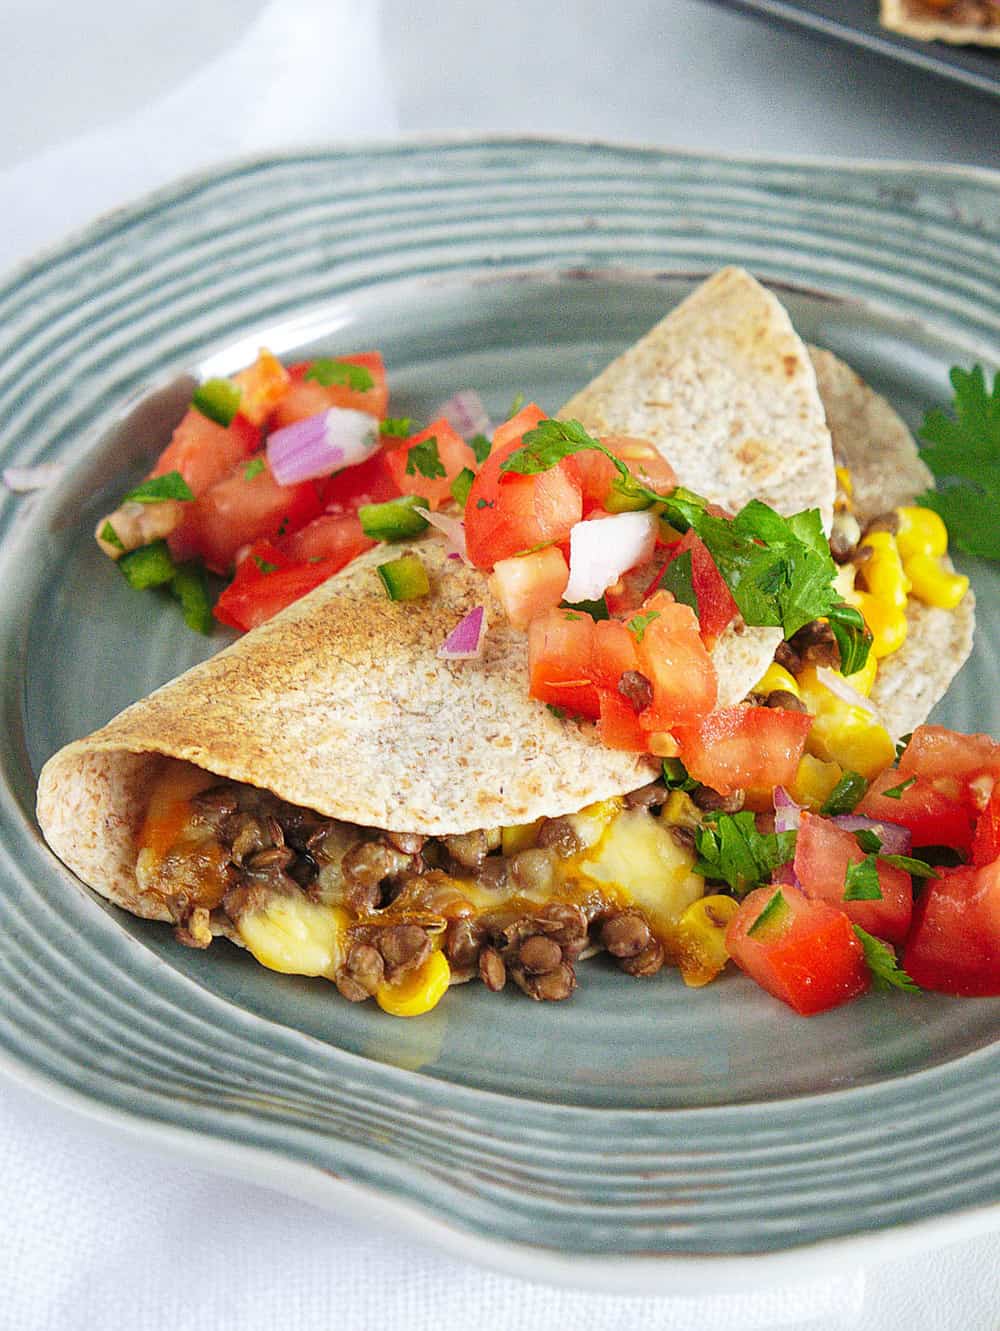 lentil quesadilla pantry meal on of the last minute dinner ideas.